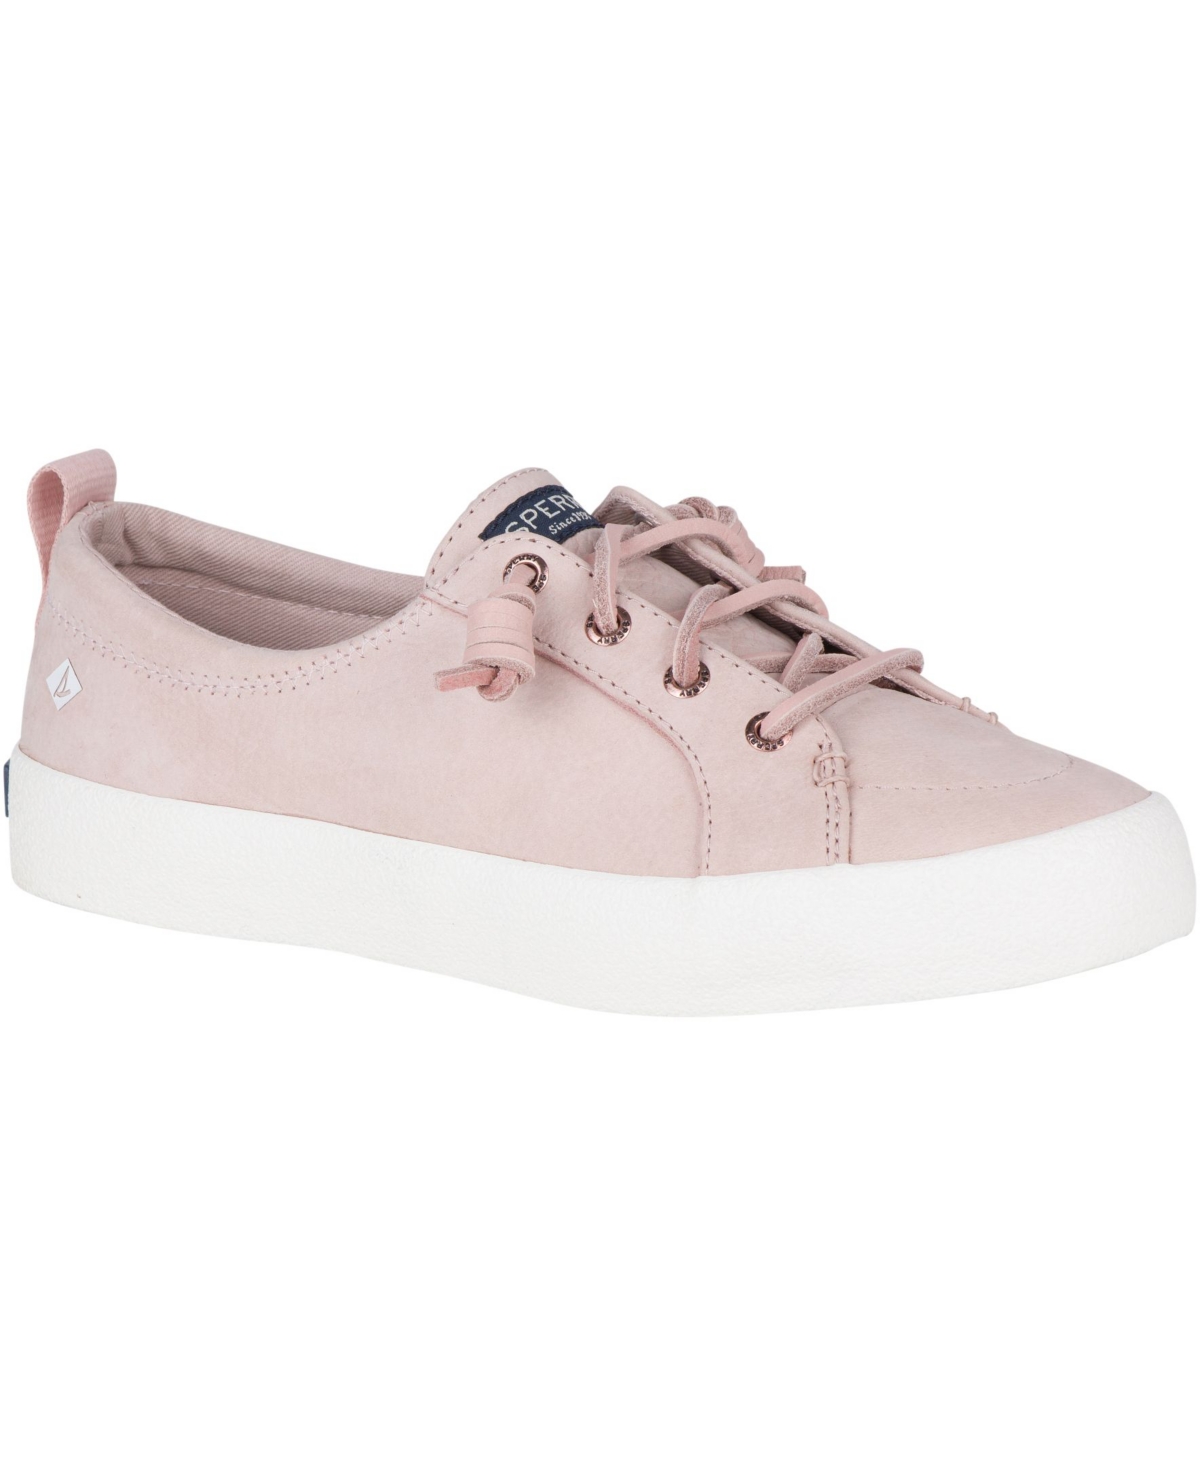 Women's Crest Vibe Leather Sneakers, Created for Macy's - Rose Dust